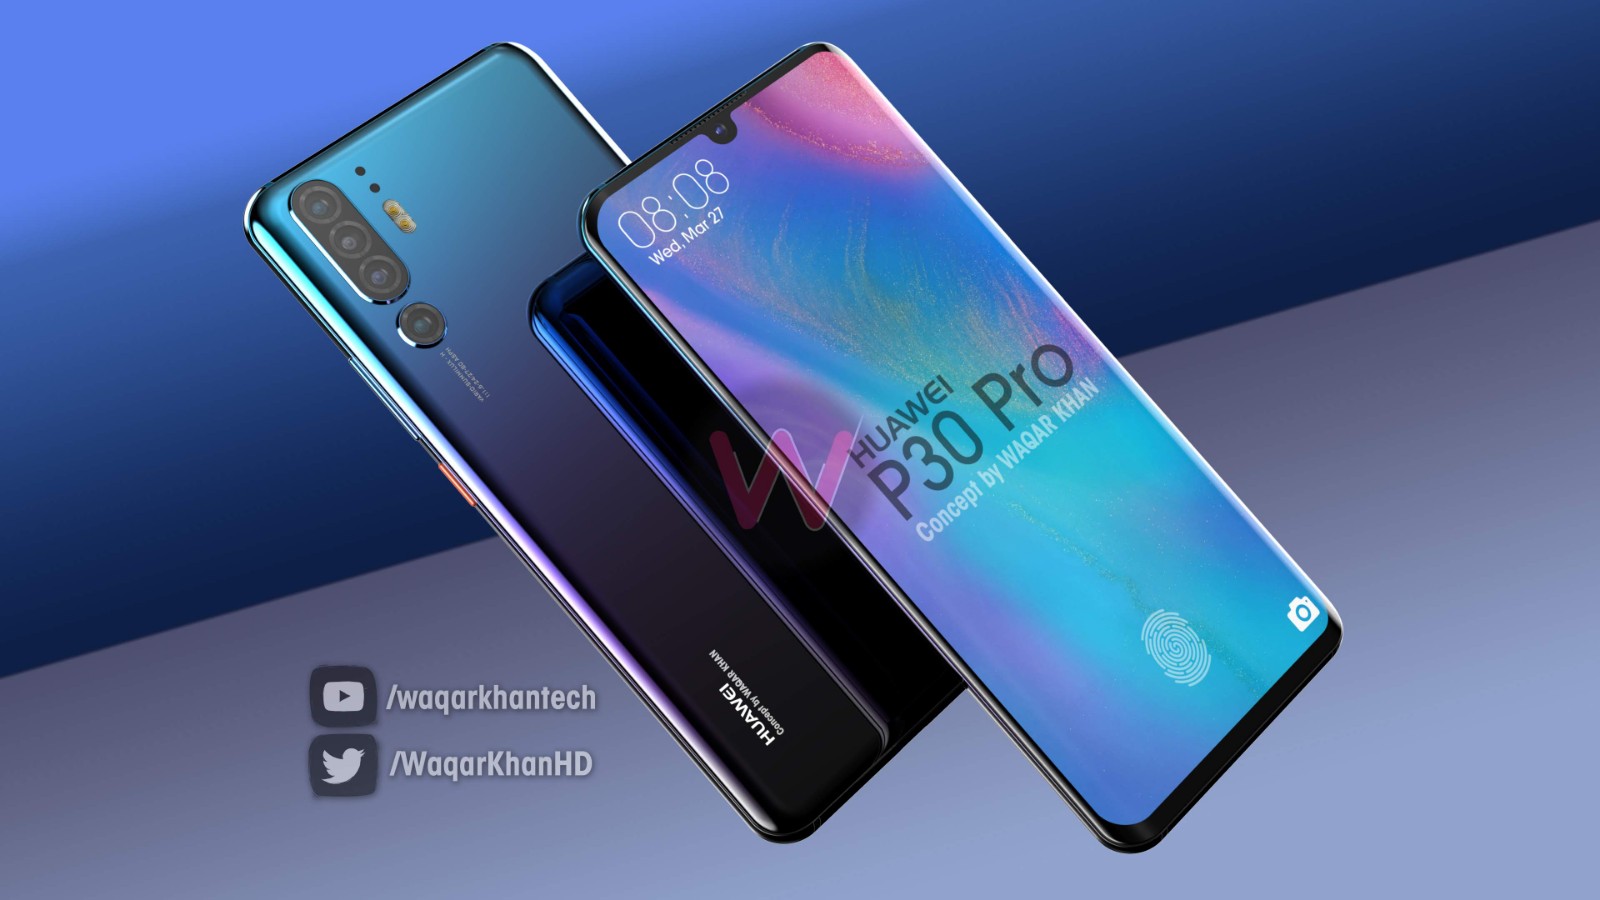 Huawei P30 Pro: The Quad Camera crushes The Competition